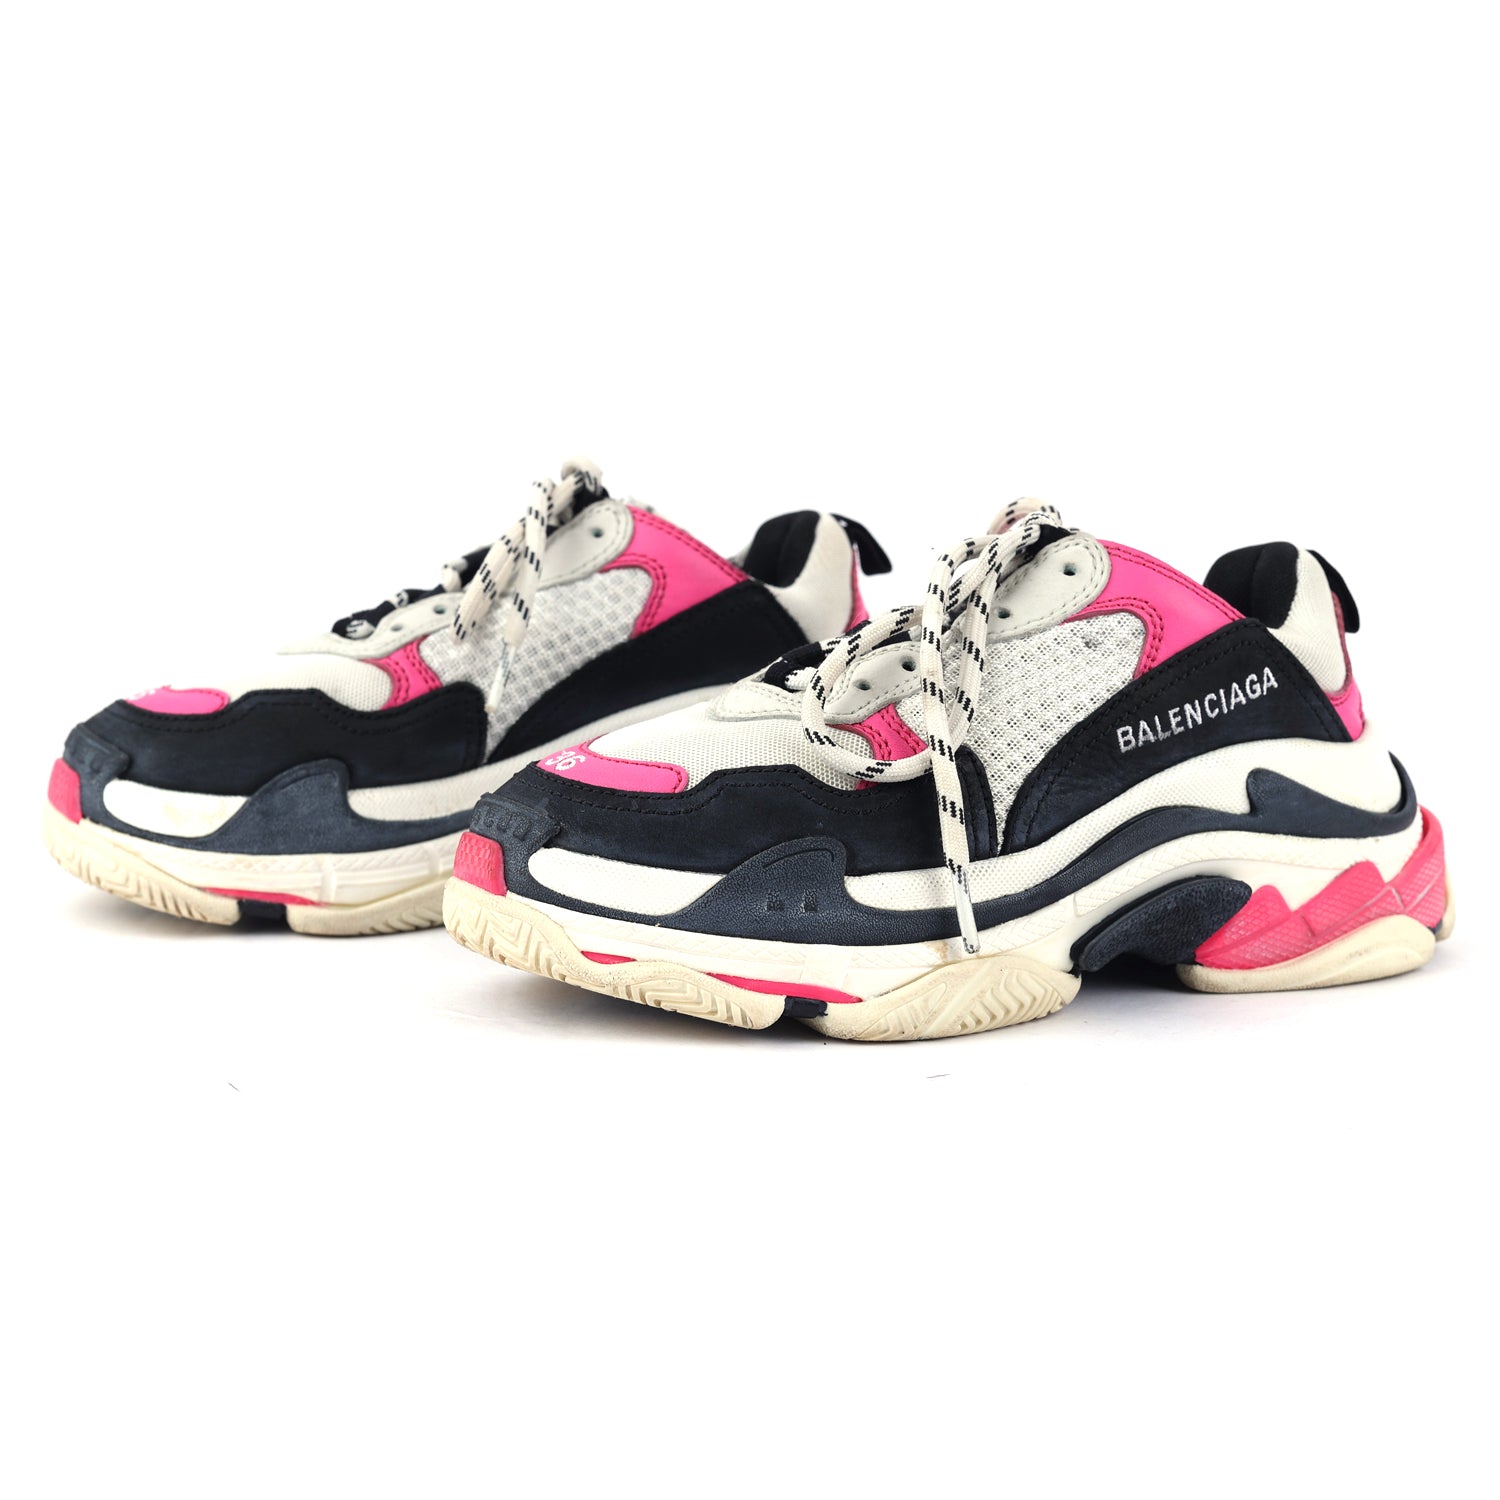 Tricolor Leather and Mesh Triple S Sneakers - Size EU 36